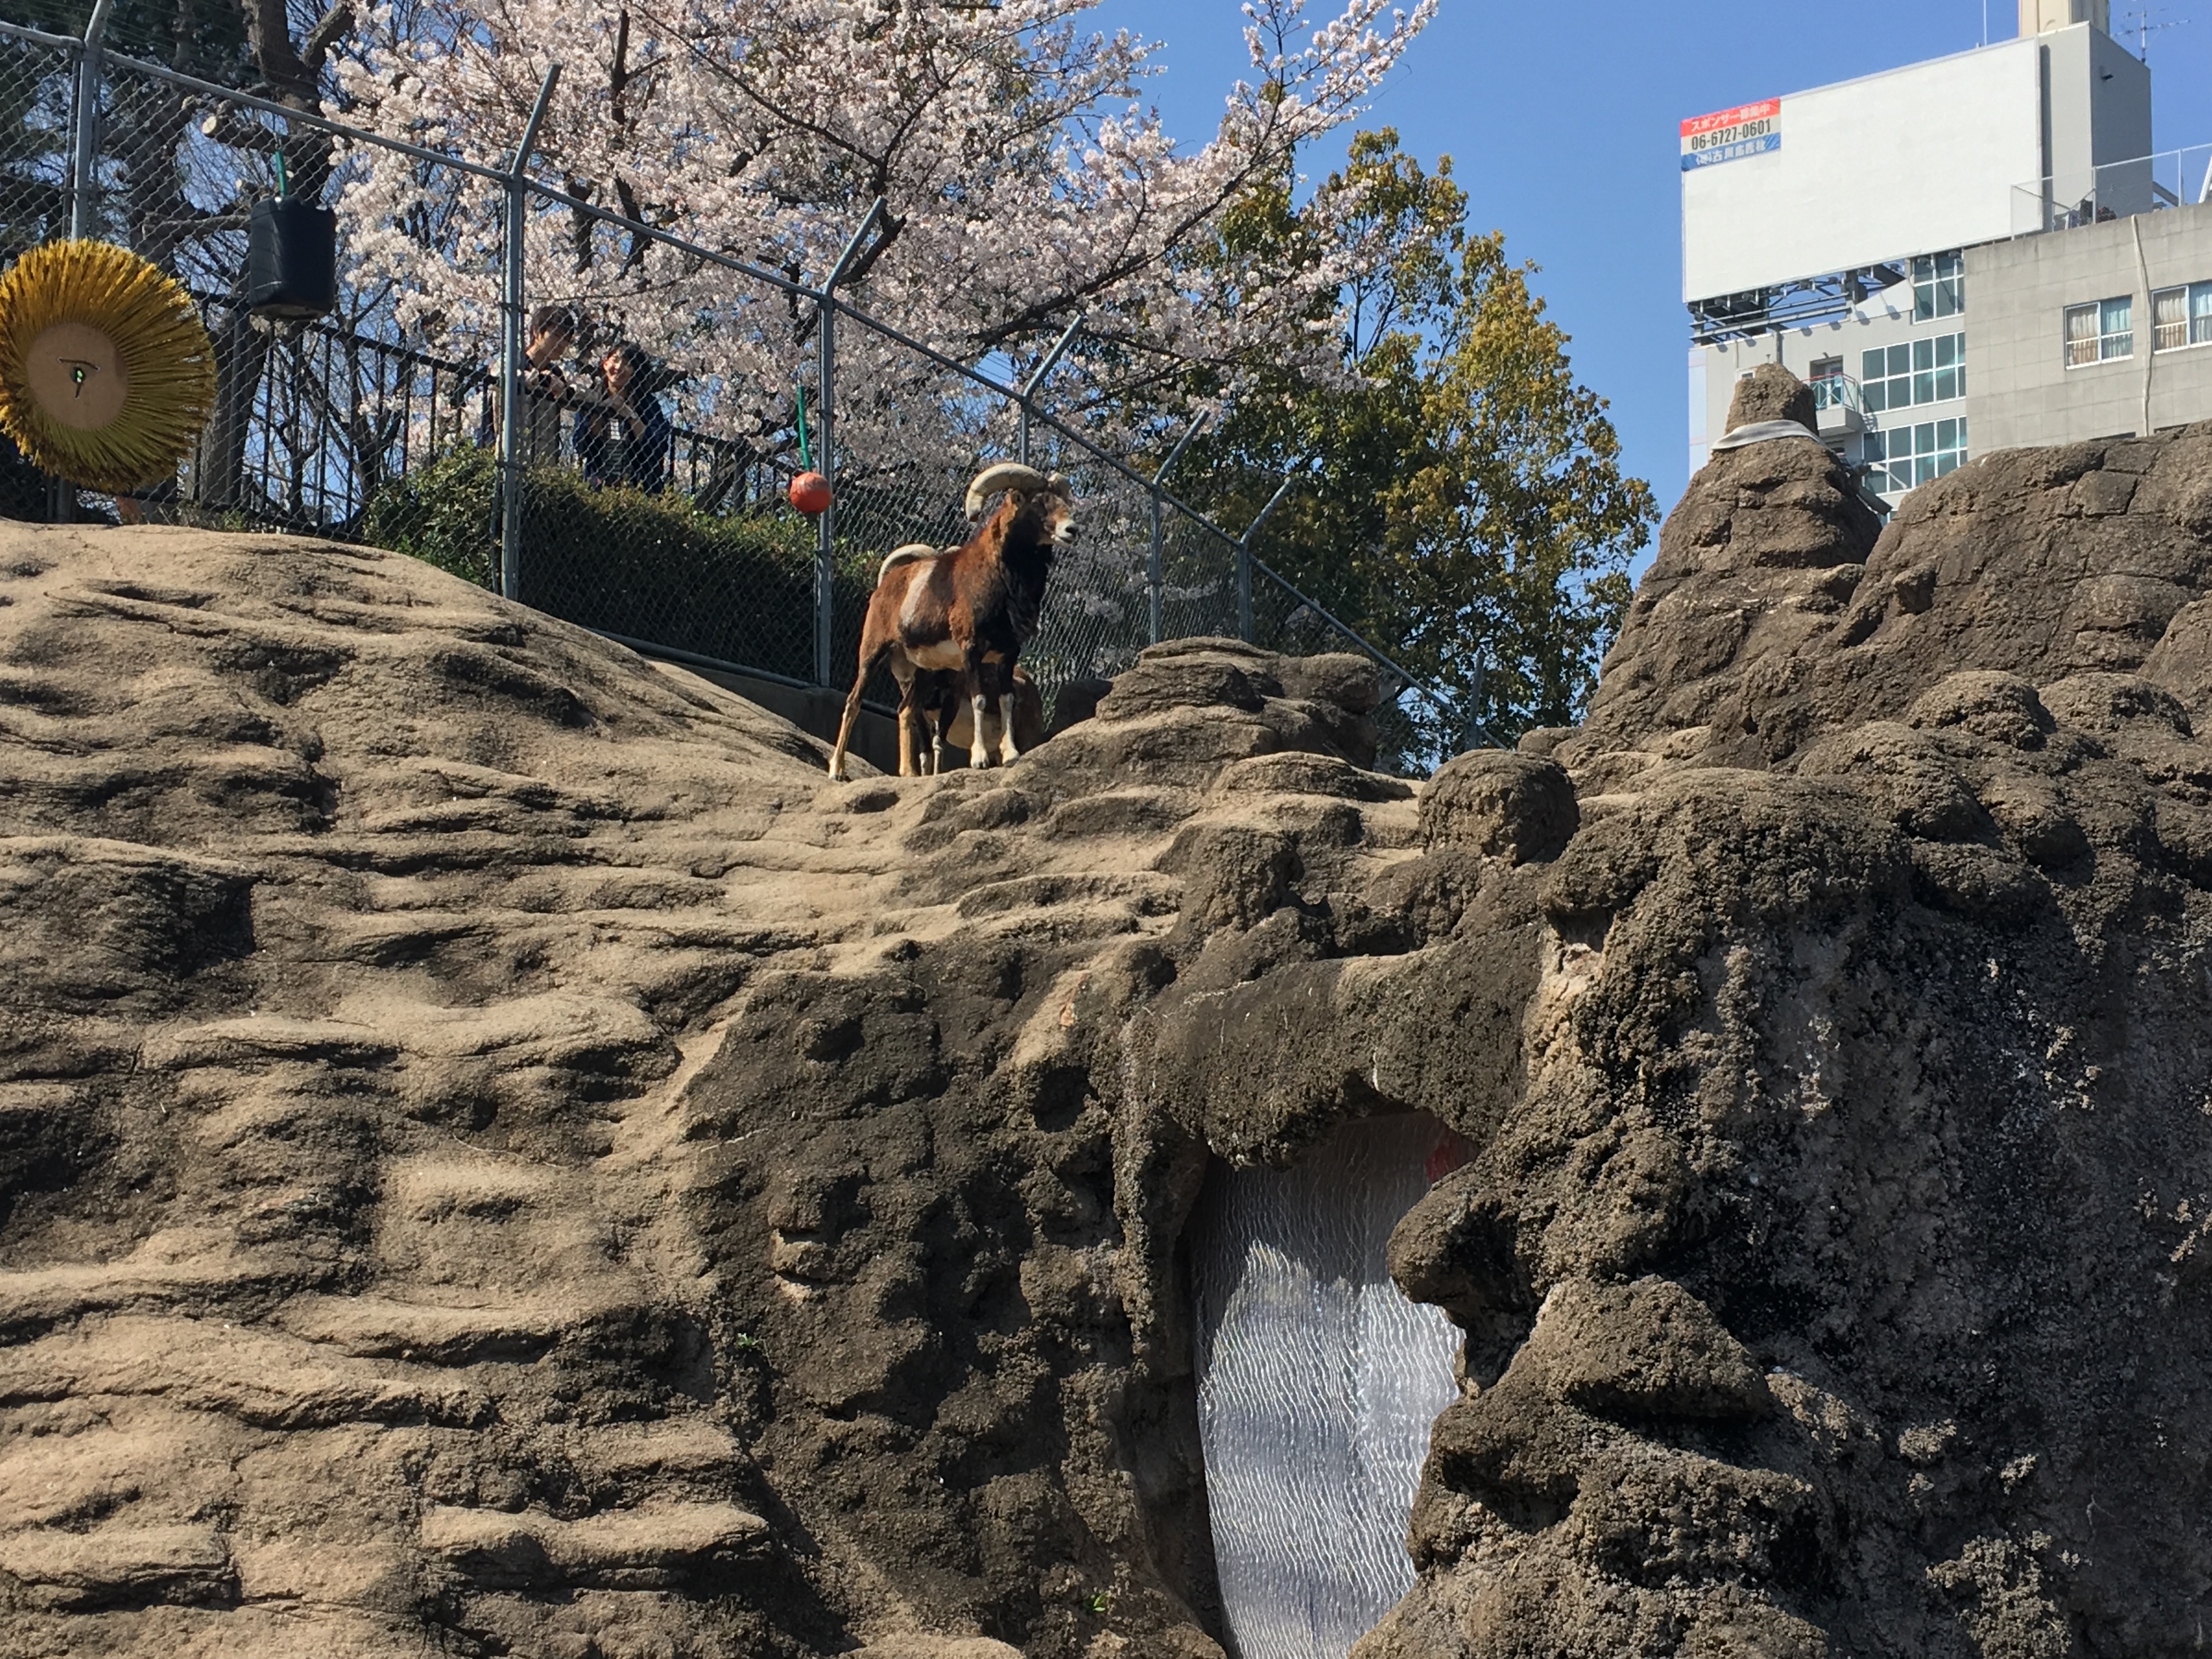 ram standing on top of rock like mass with cherry blossoms in background